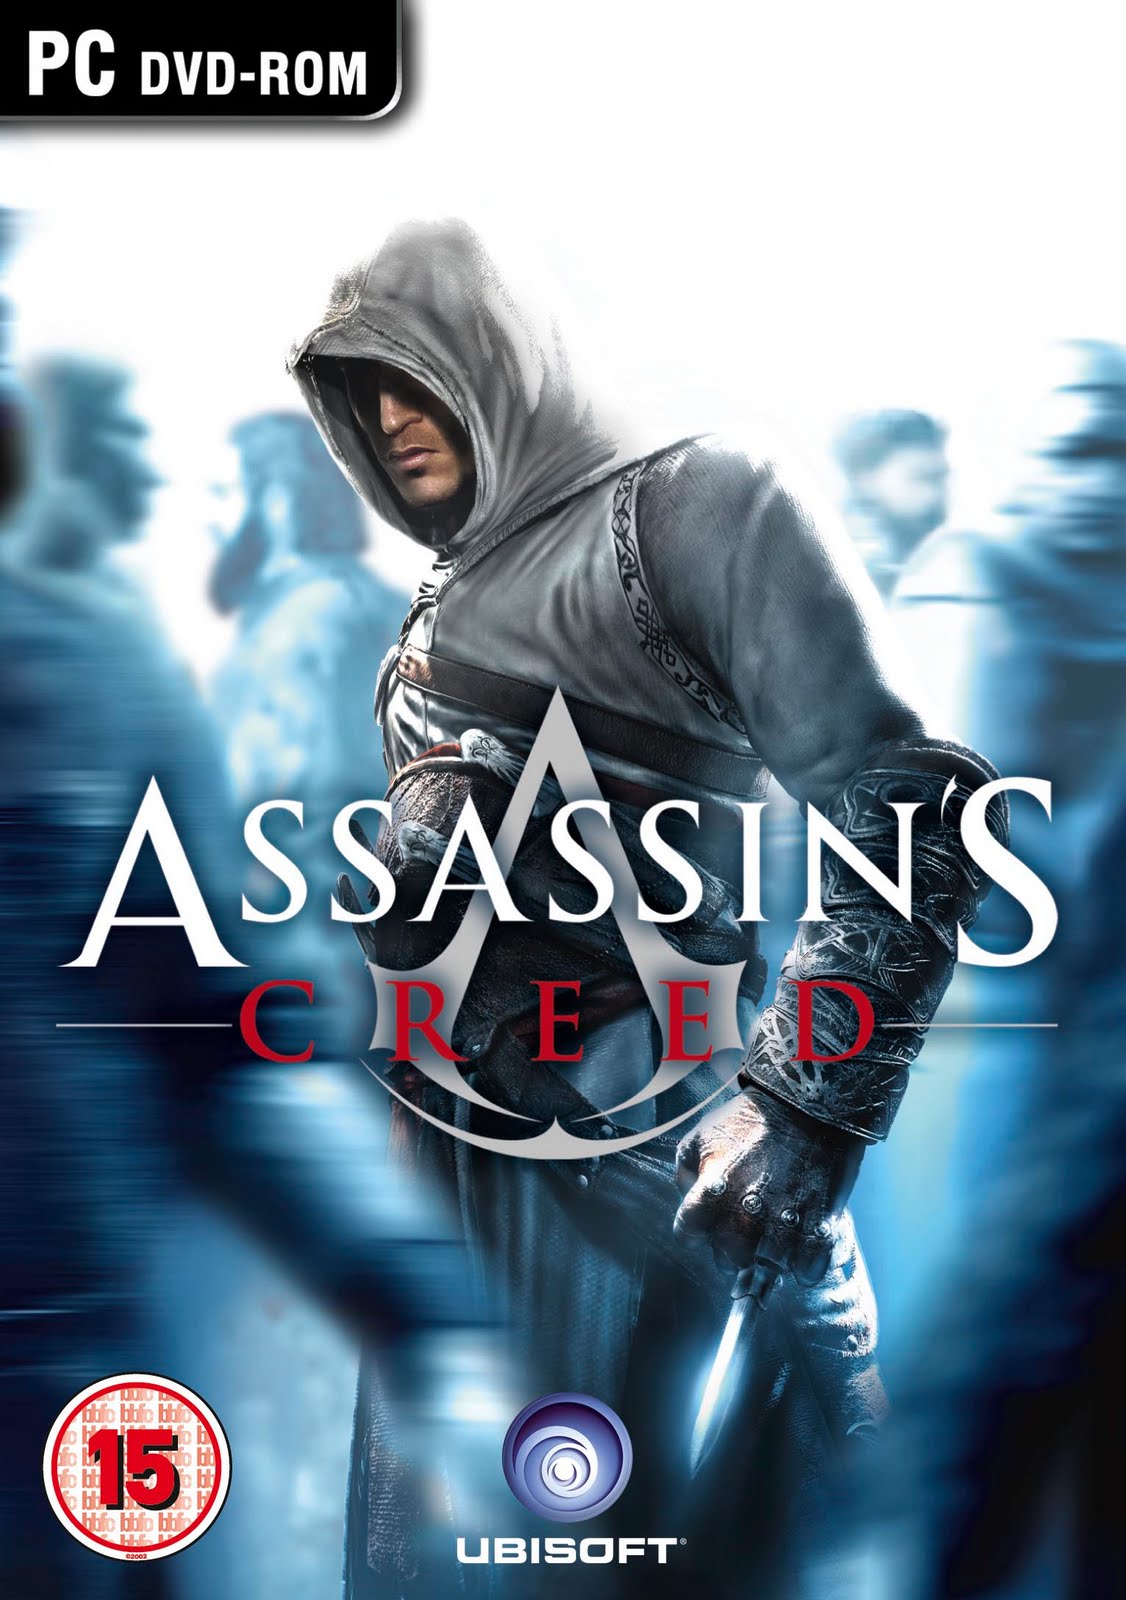 crack file download assassin creed rough